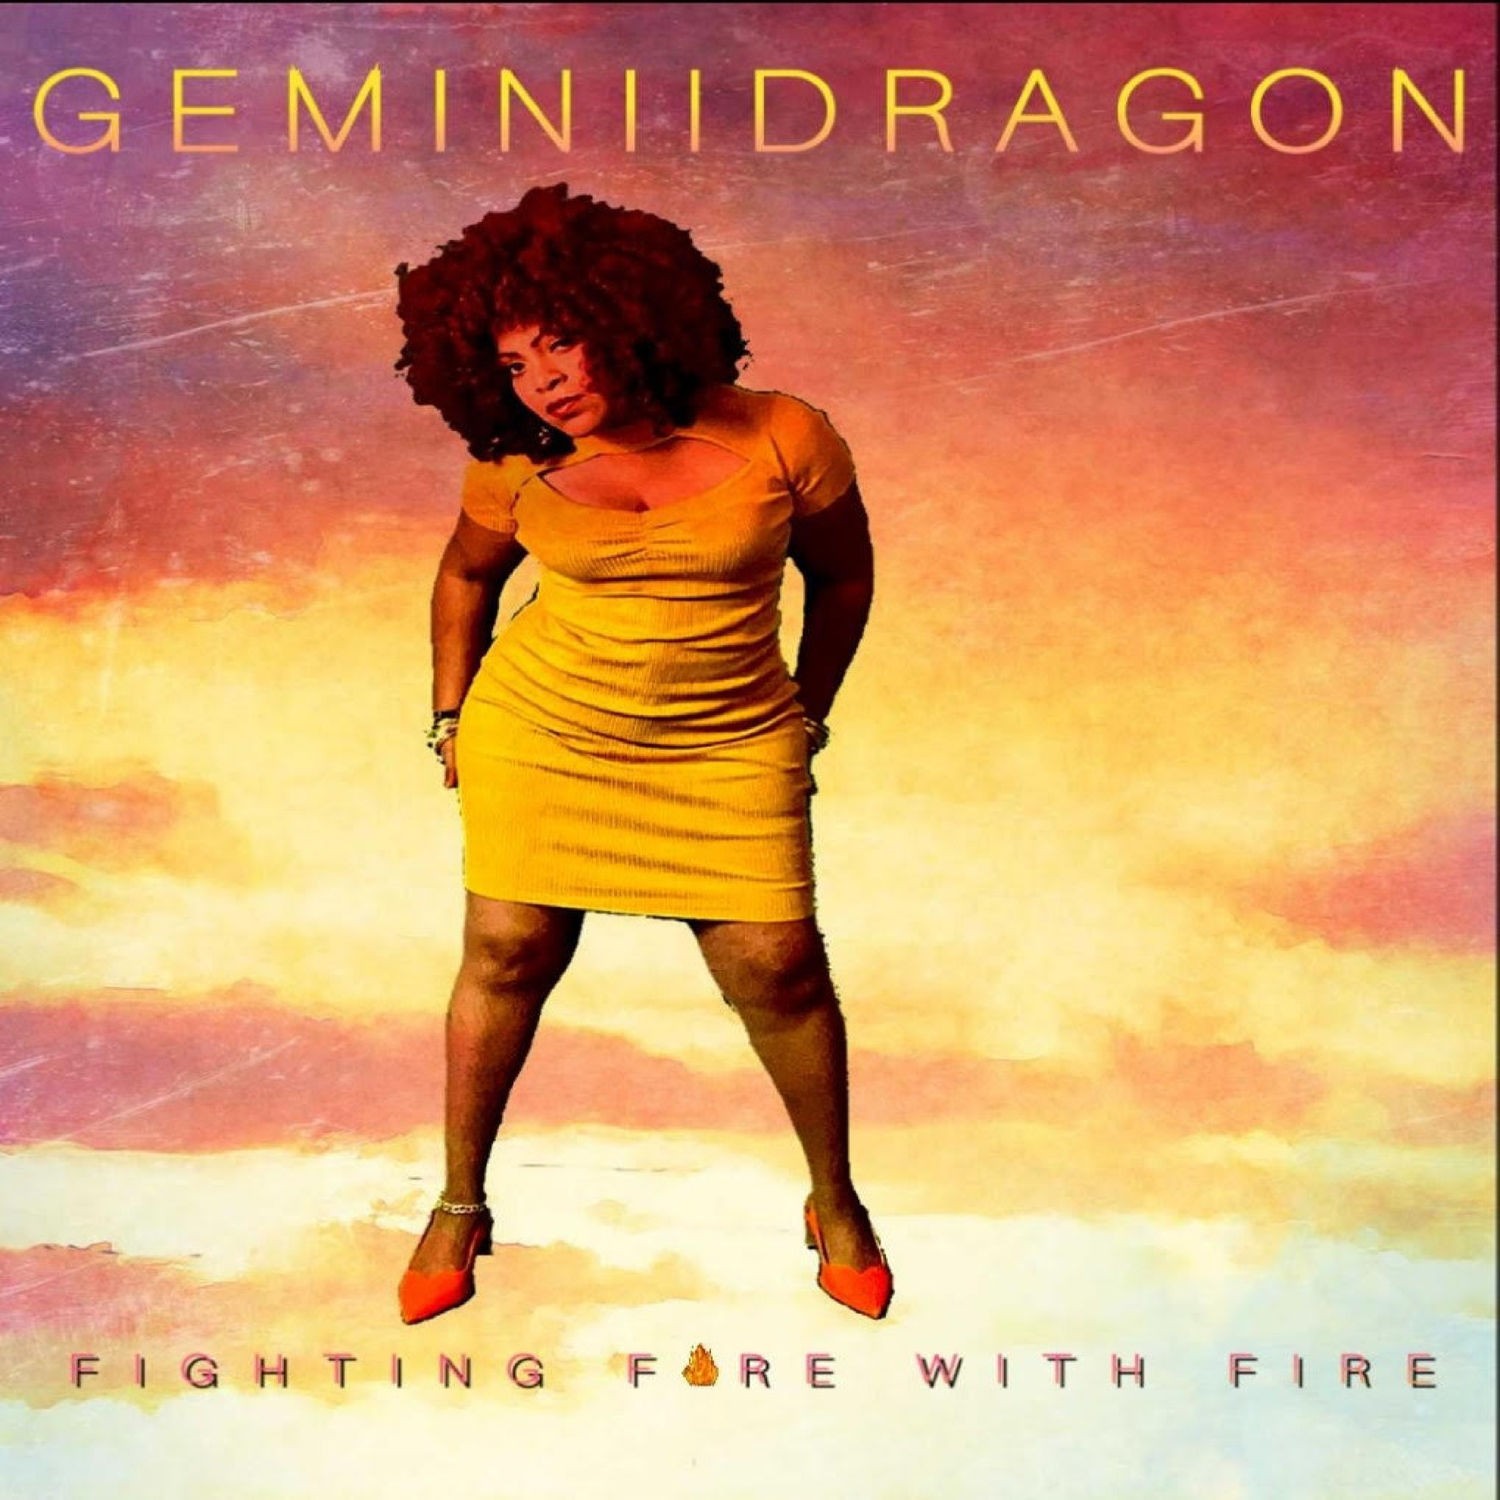 Geminii Dragon - Fighting Fire With Fire